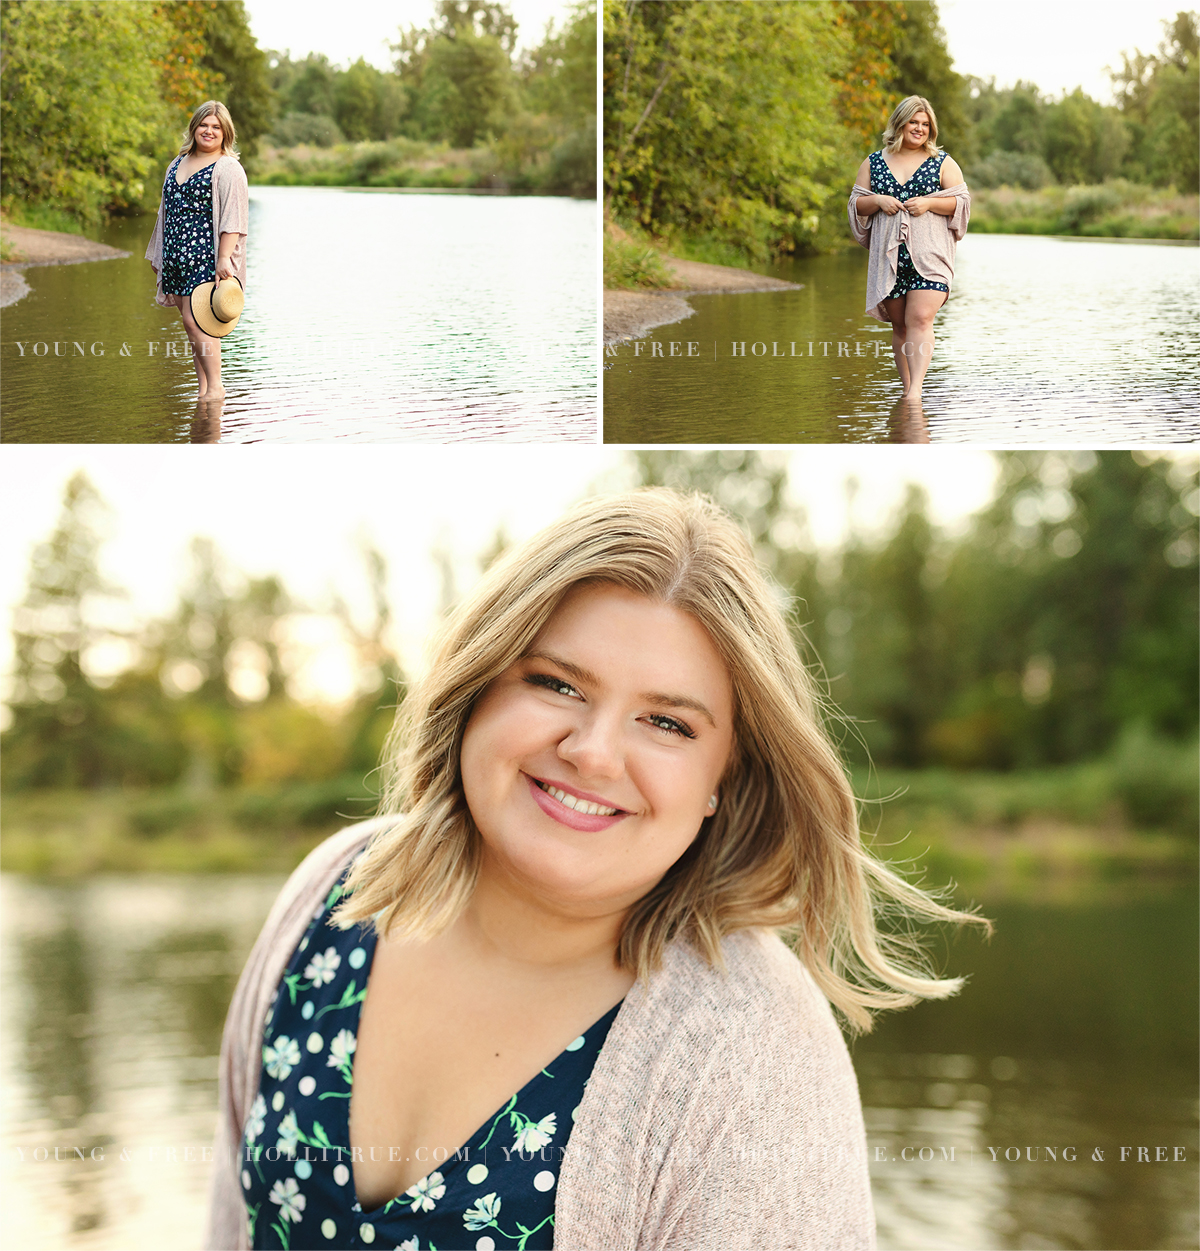 Beautiful senior pictures of a girl in a river at sunset by Holli True